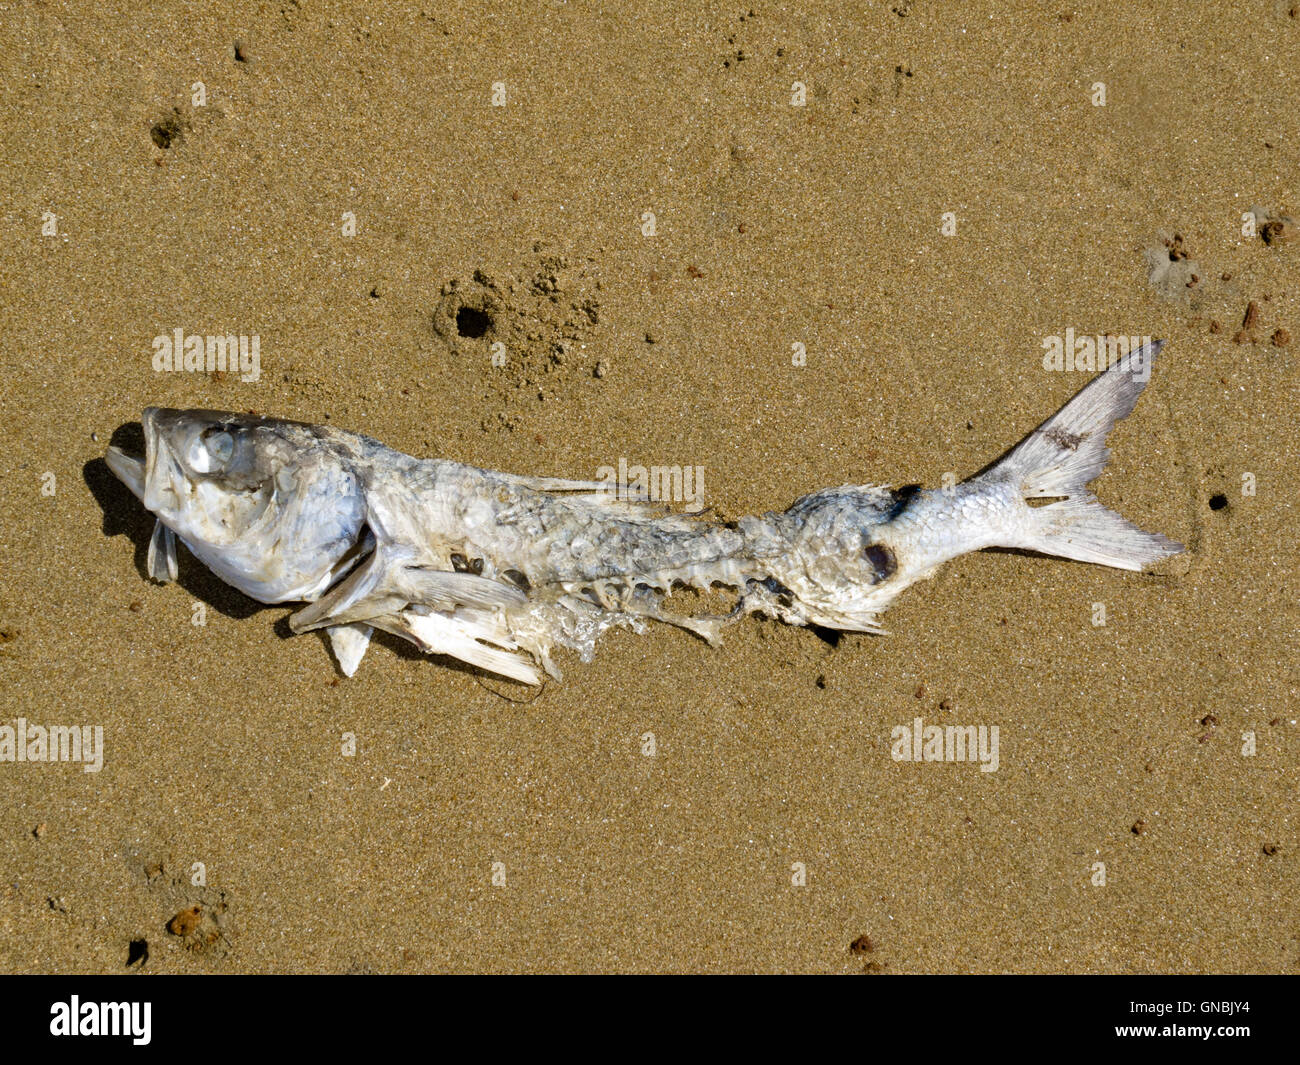 Decomposing dead fish carcass washed ashore Stock Photo